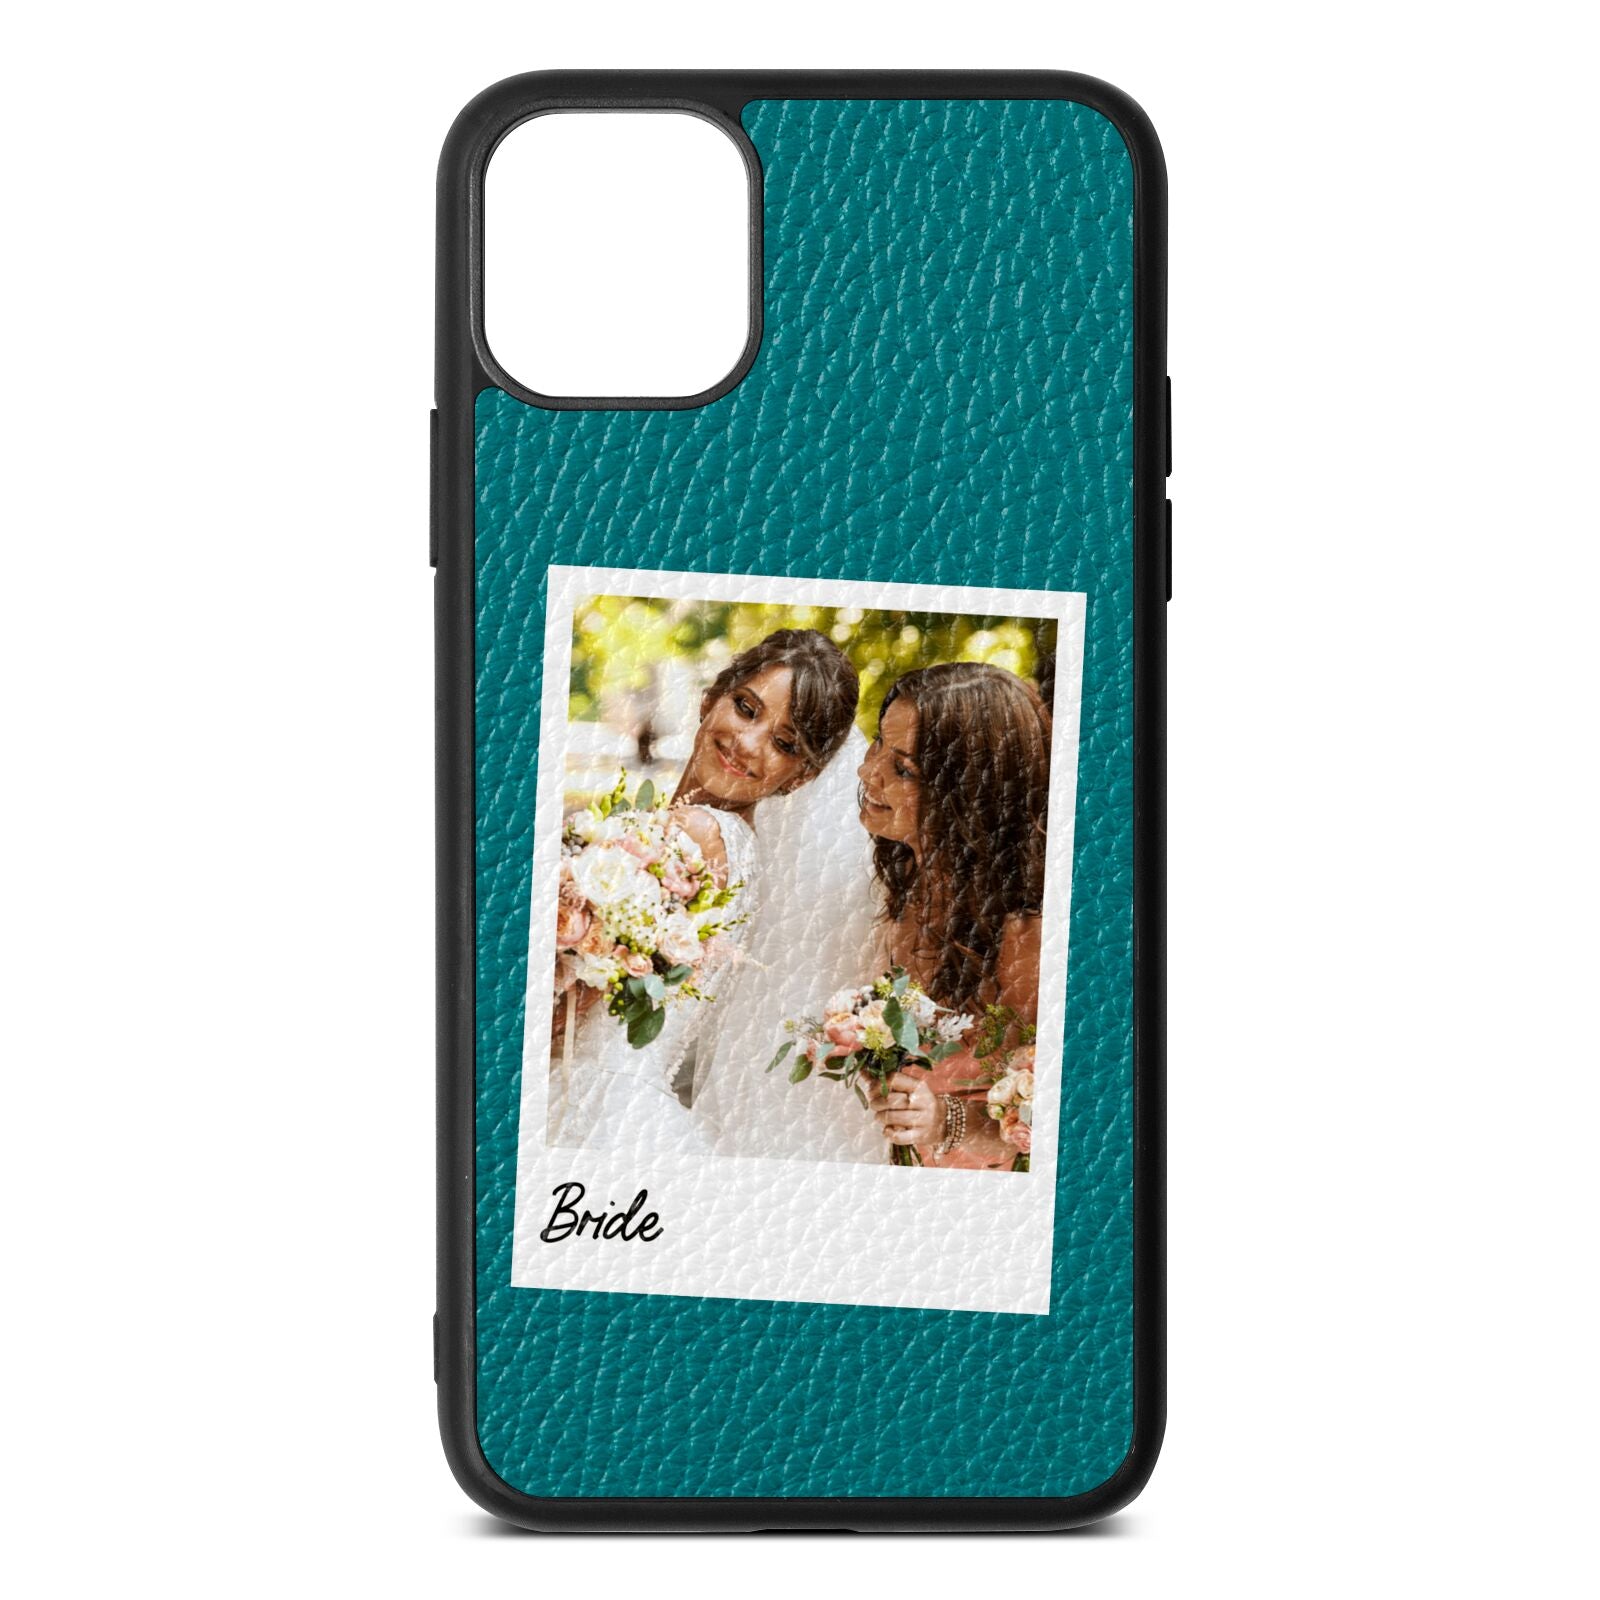 Bridal Photo Green Pebble Leather iPhone 11 Pro Max Case